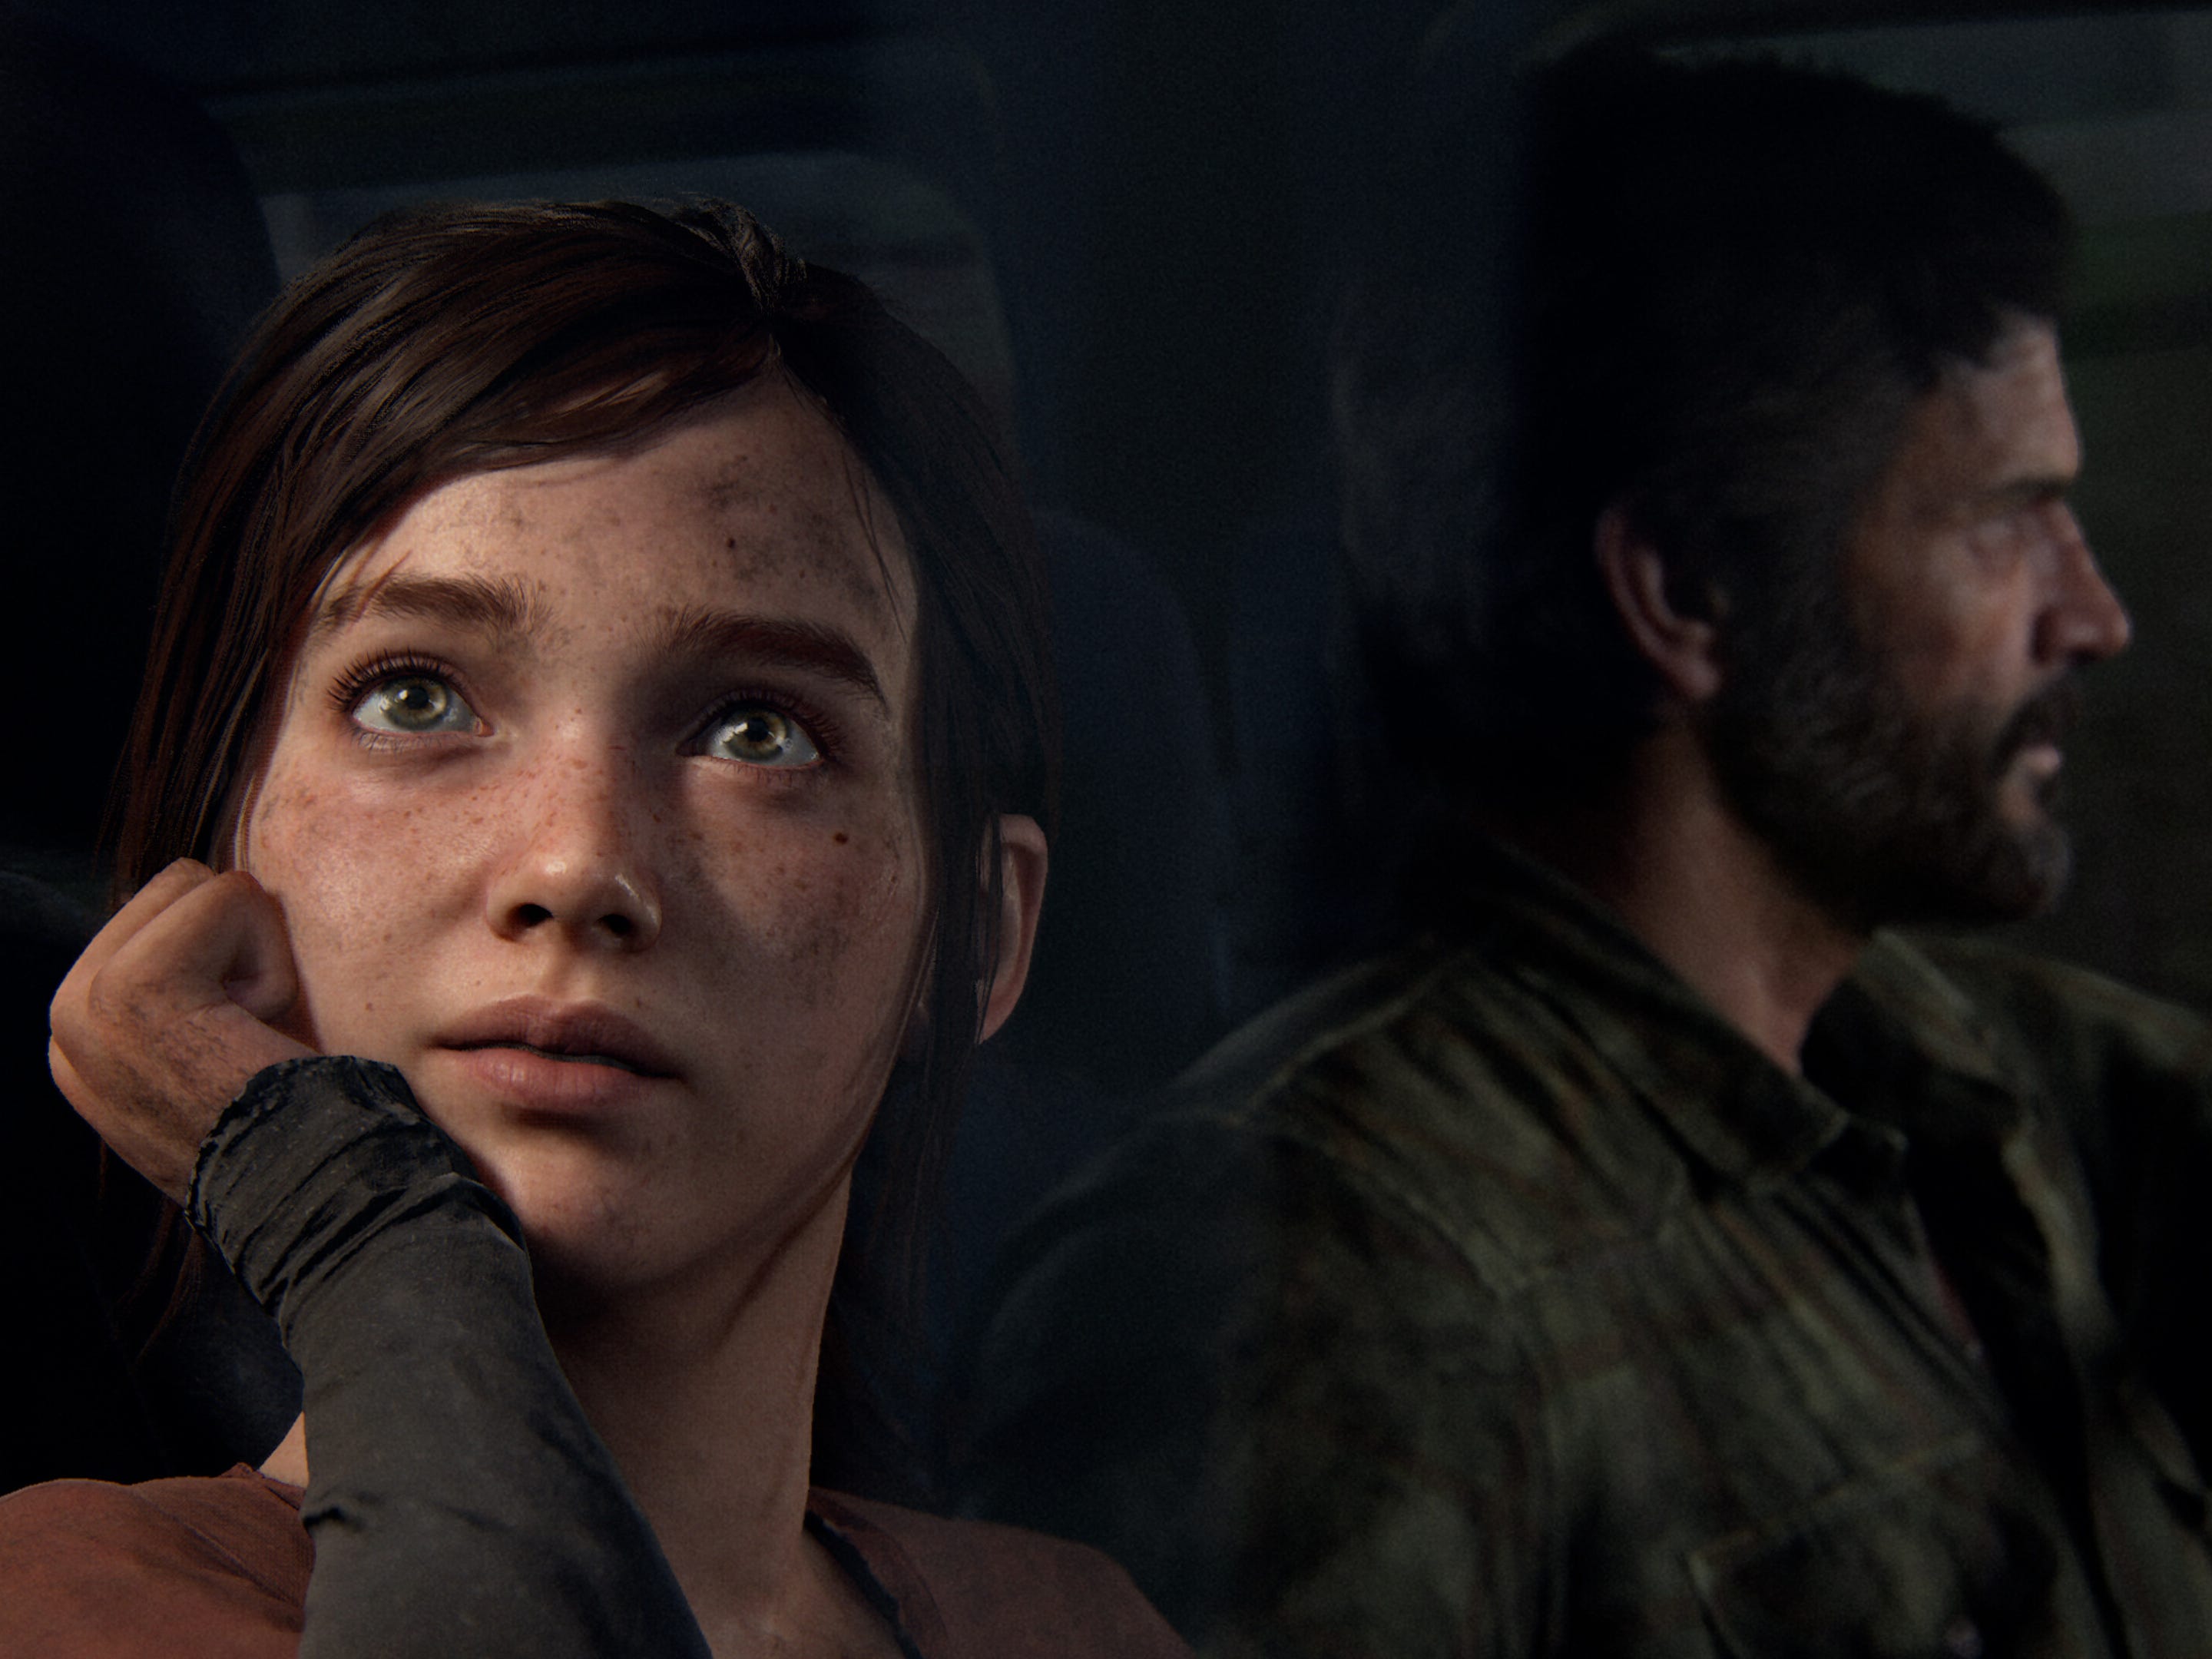 The Last of Us Part I Remake